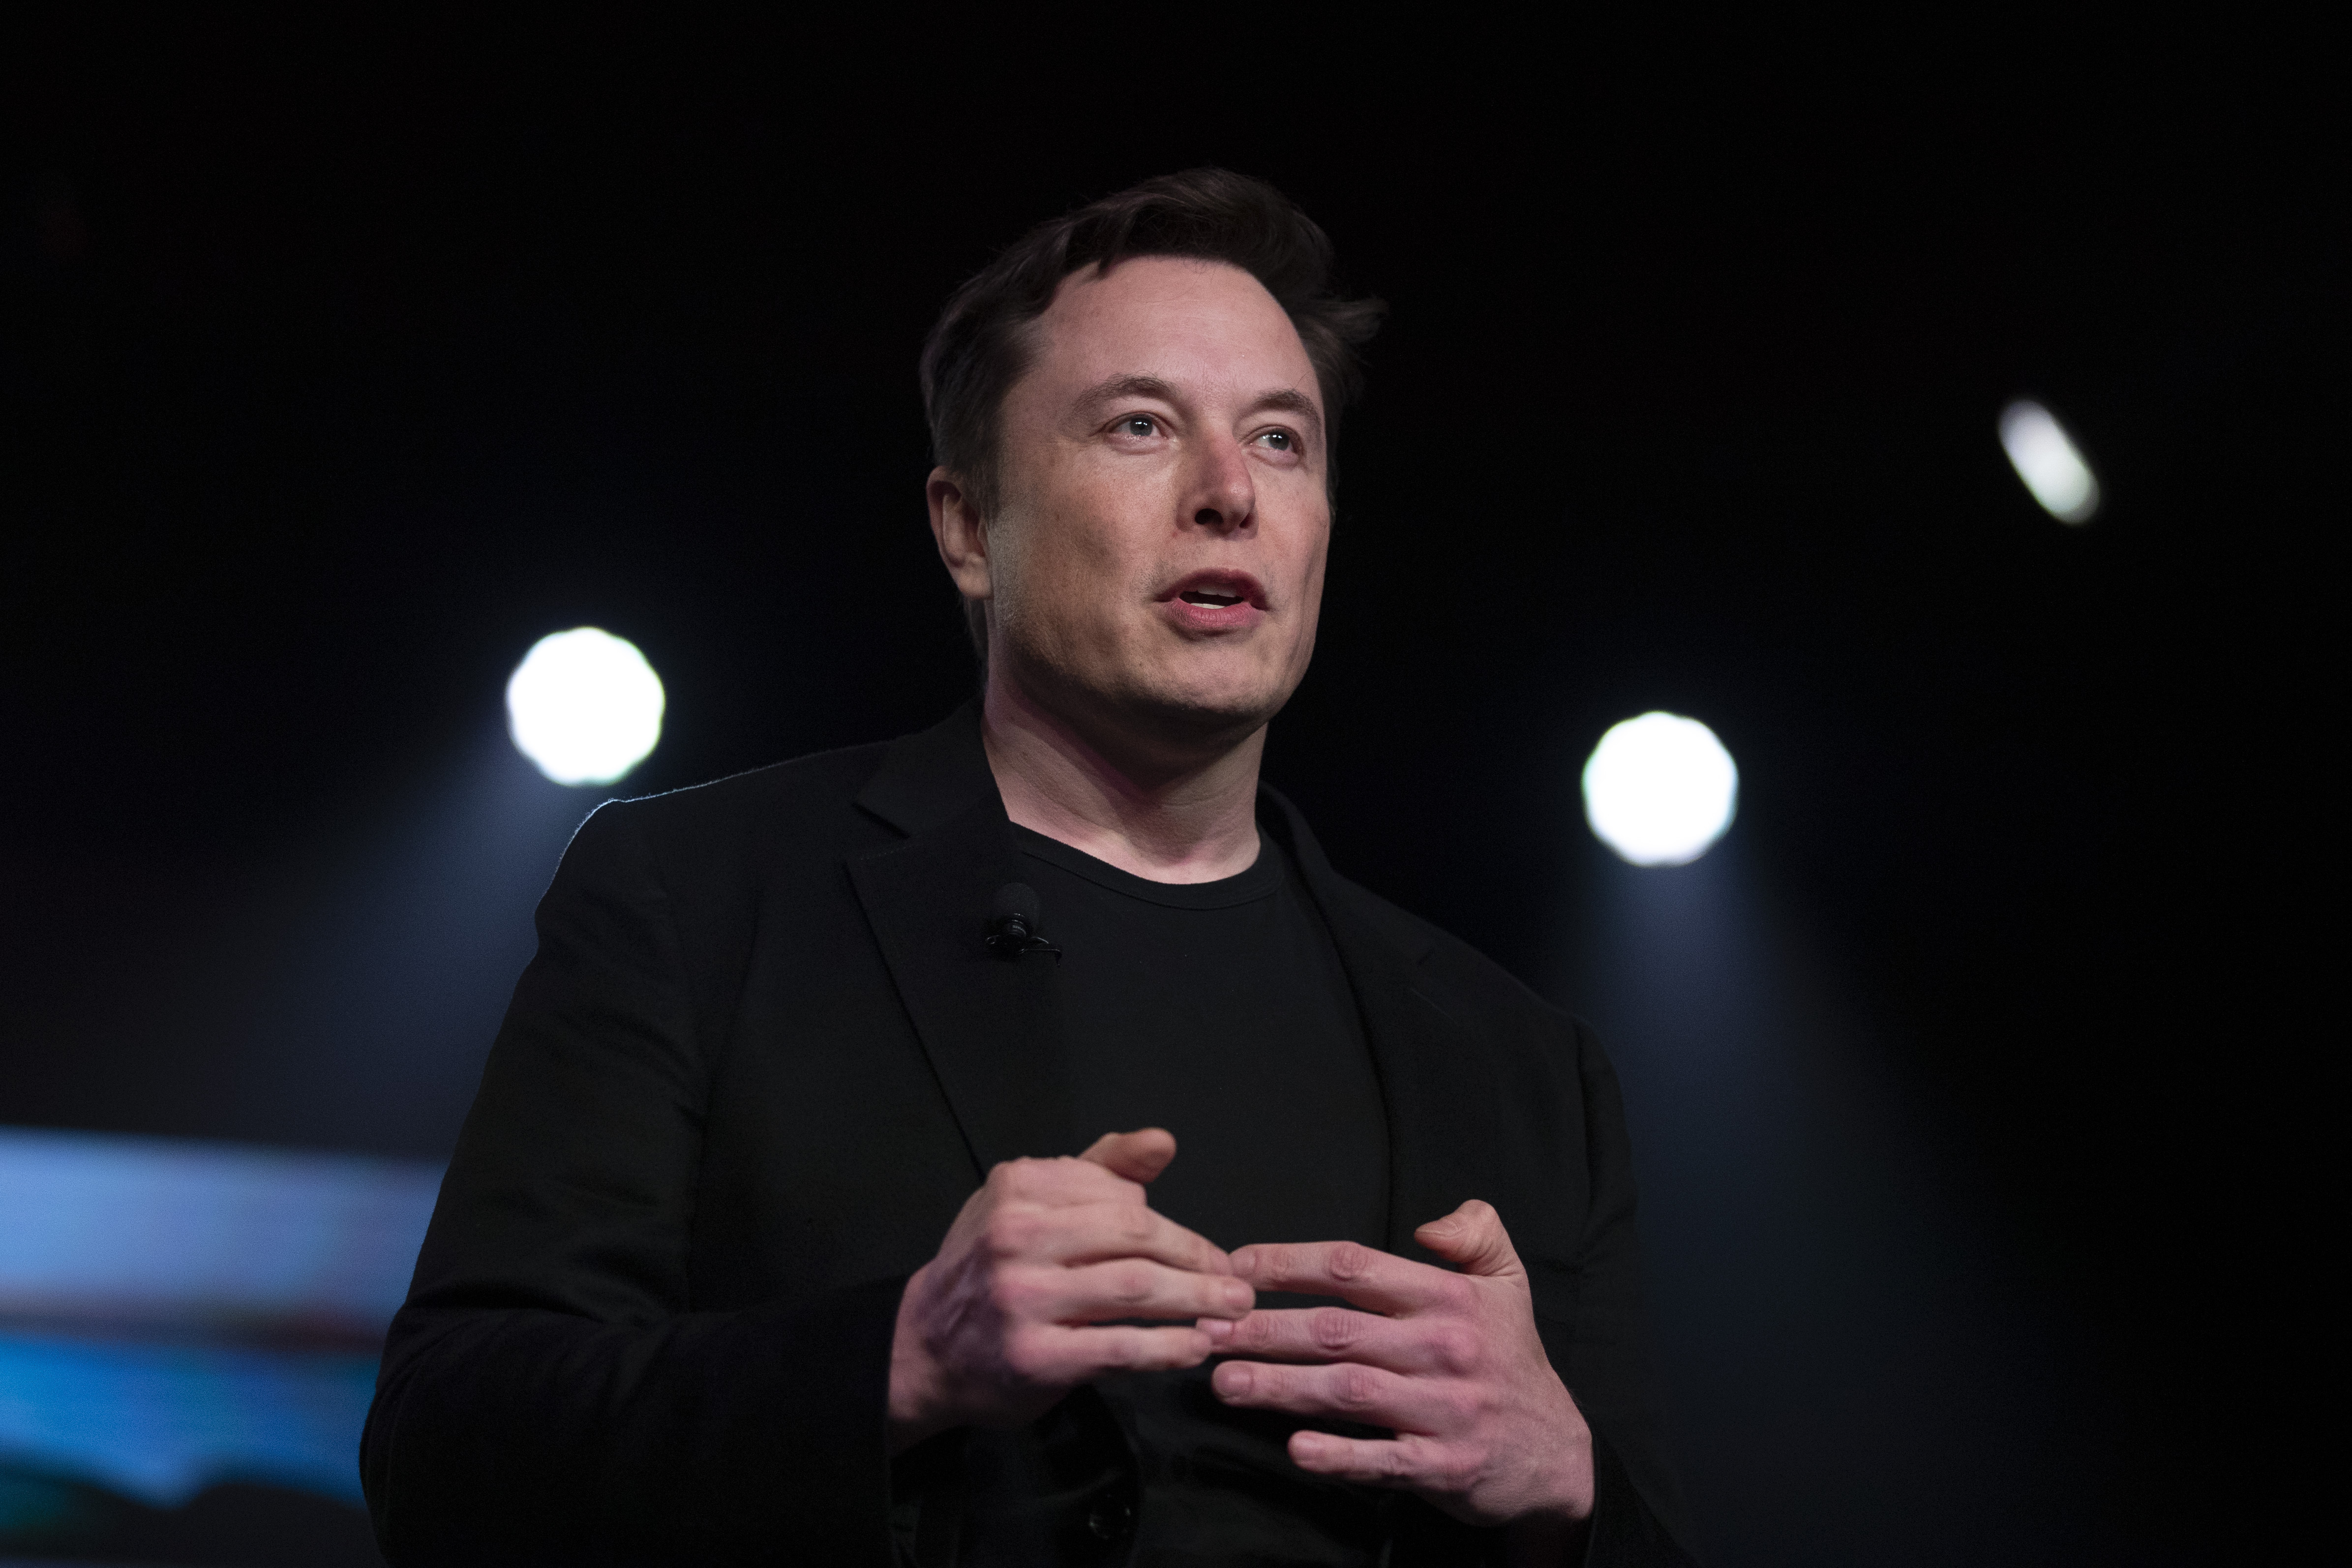 Elon Musk says his startup Neuralink has implanted a brain chip in its
first human